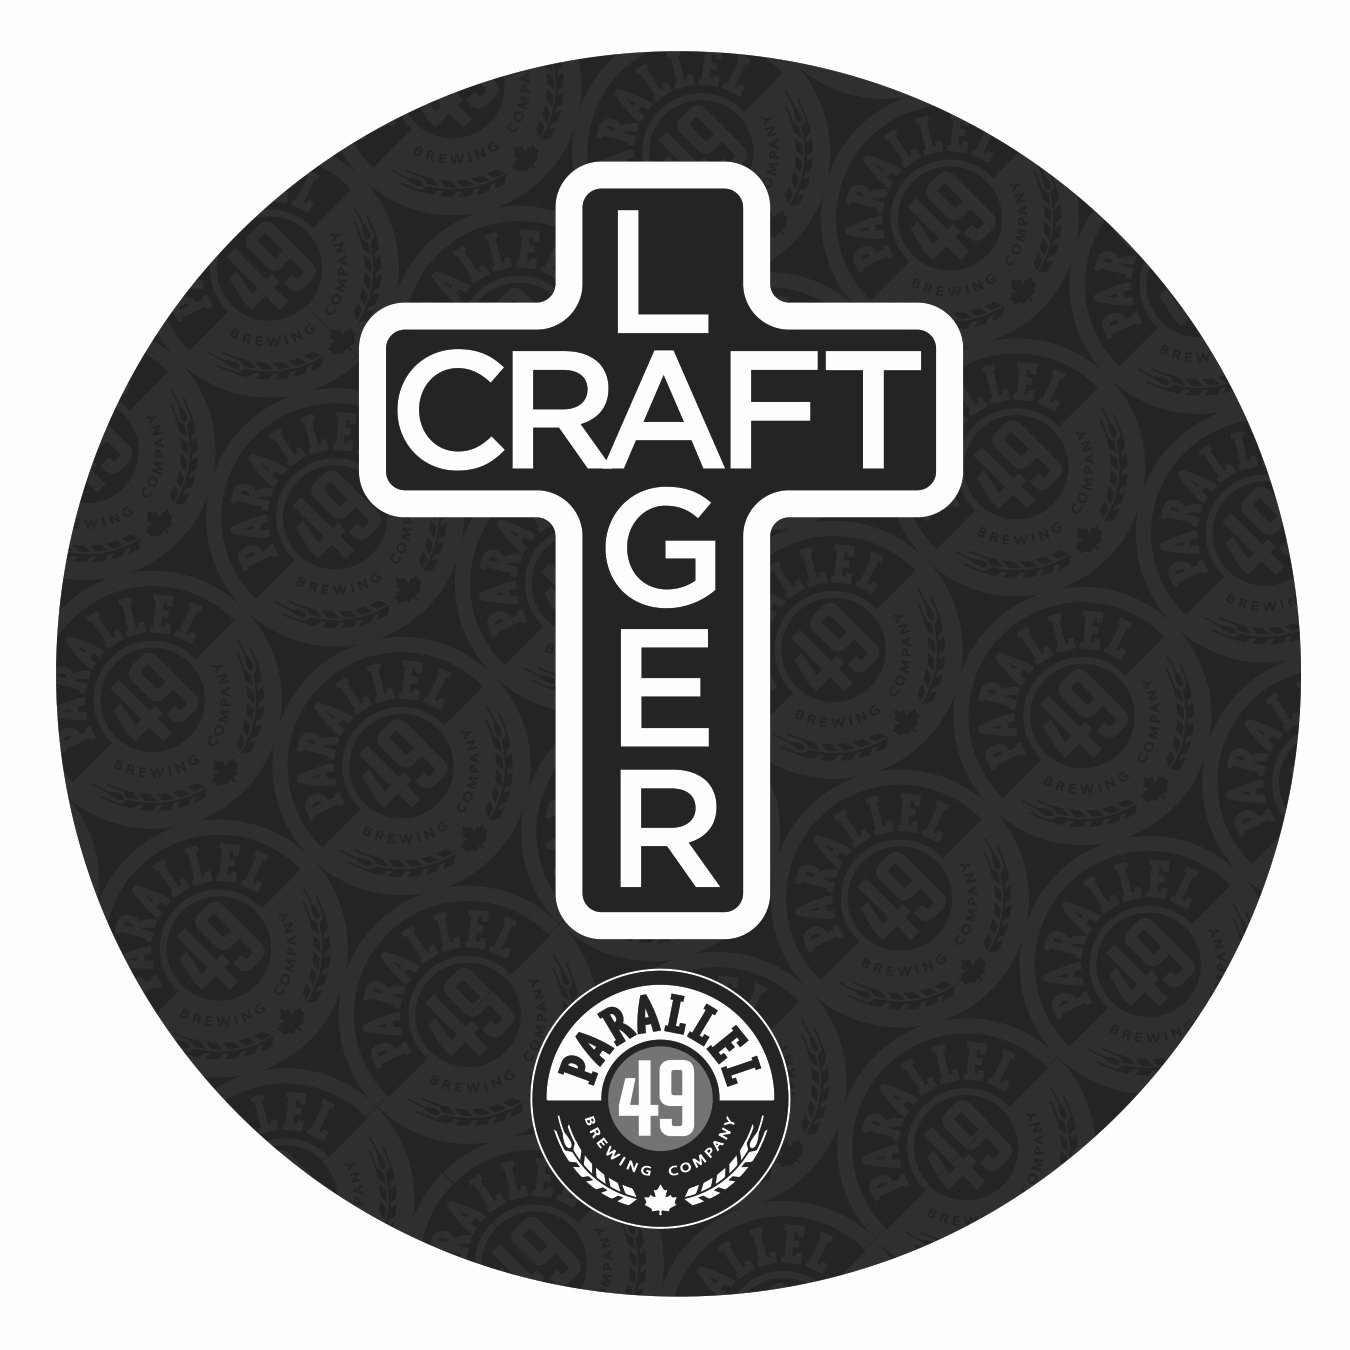 Trademark Logo CRAFT LAGER PARALLEL 49 BREWING COMPANY